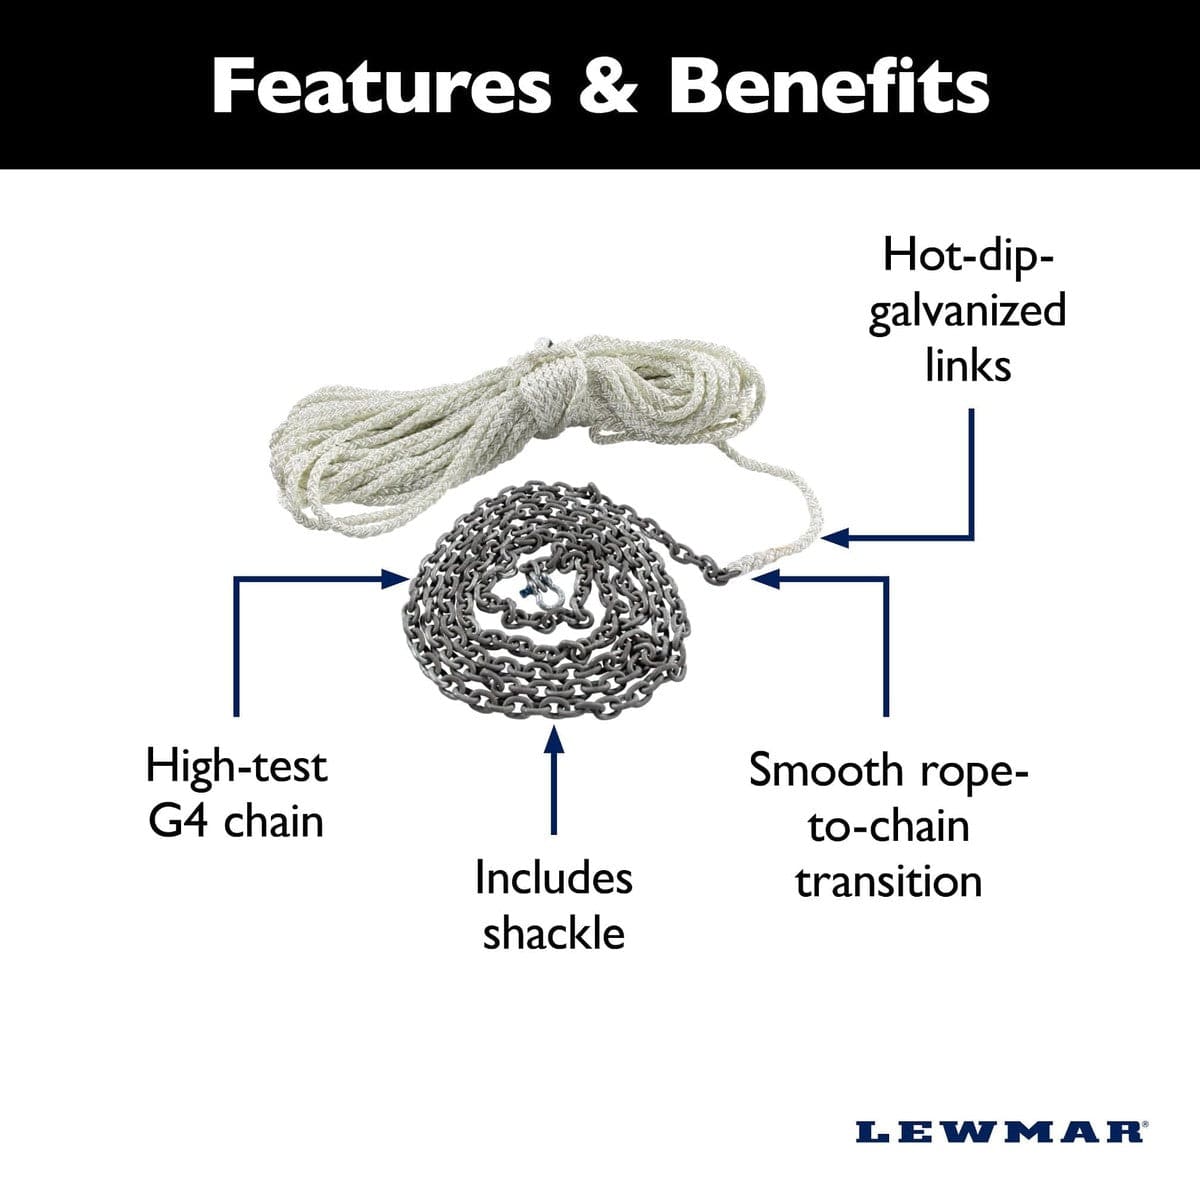 Lewmar Oversized - Not Qualified for Free Shipping Lewmar 10' 1/4" G4 Chain & 1/2" 8-Plait Rope #HM10HT200PX